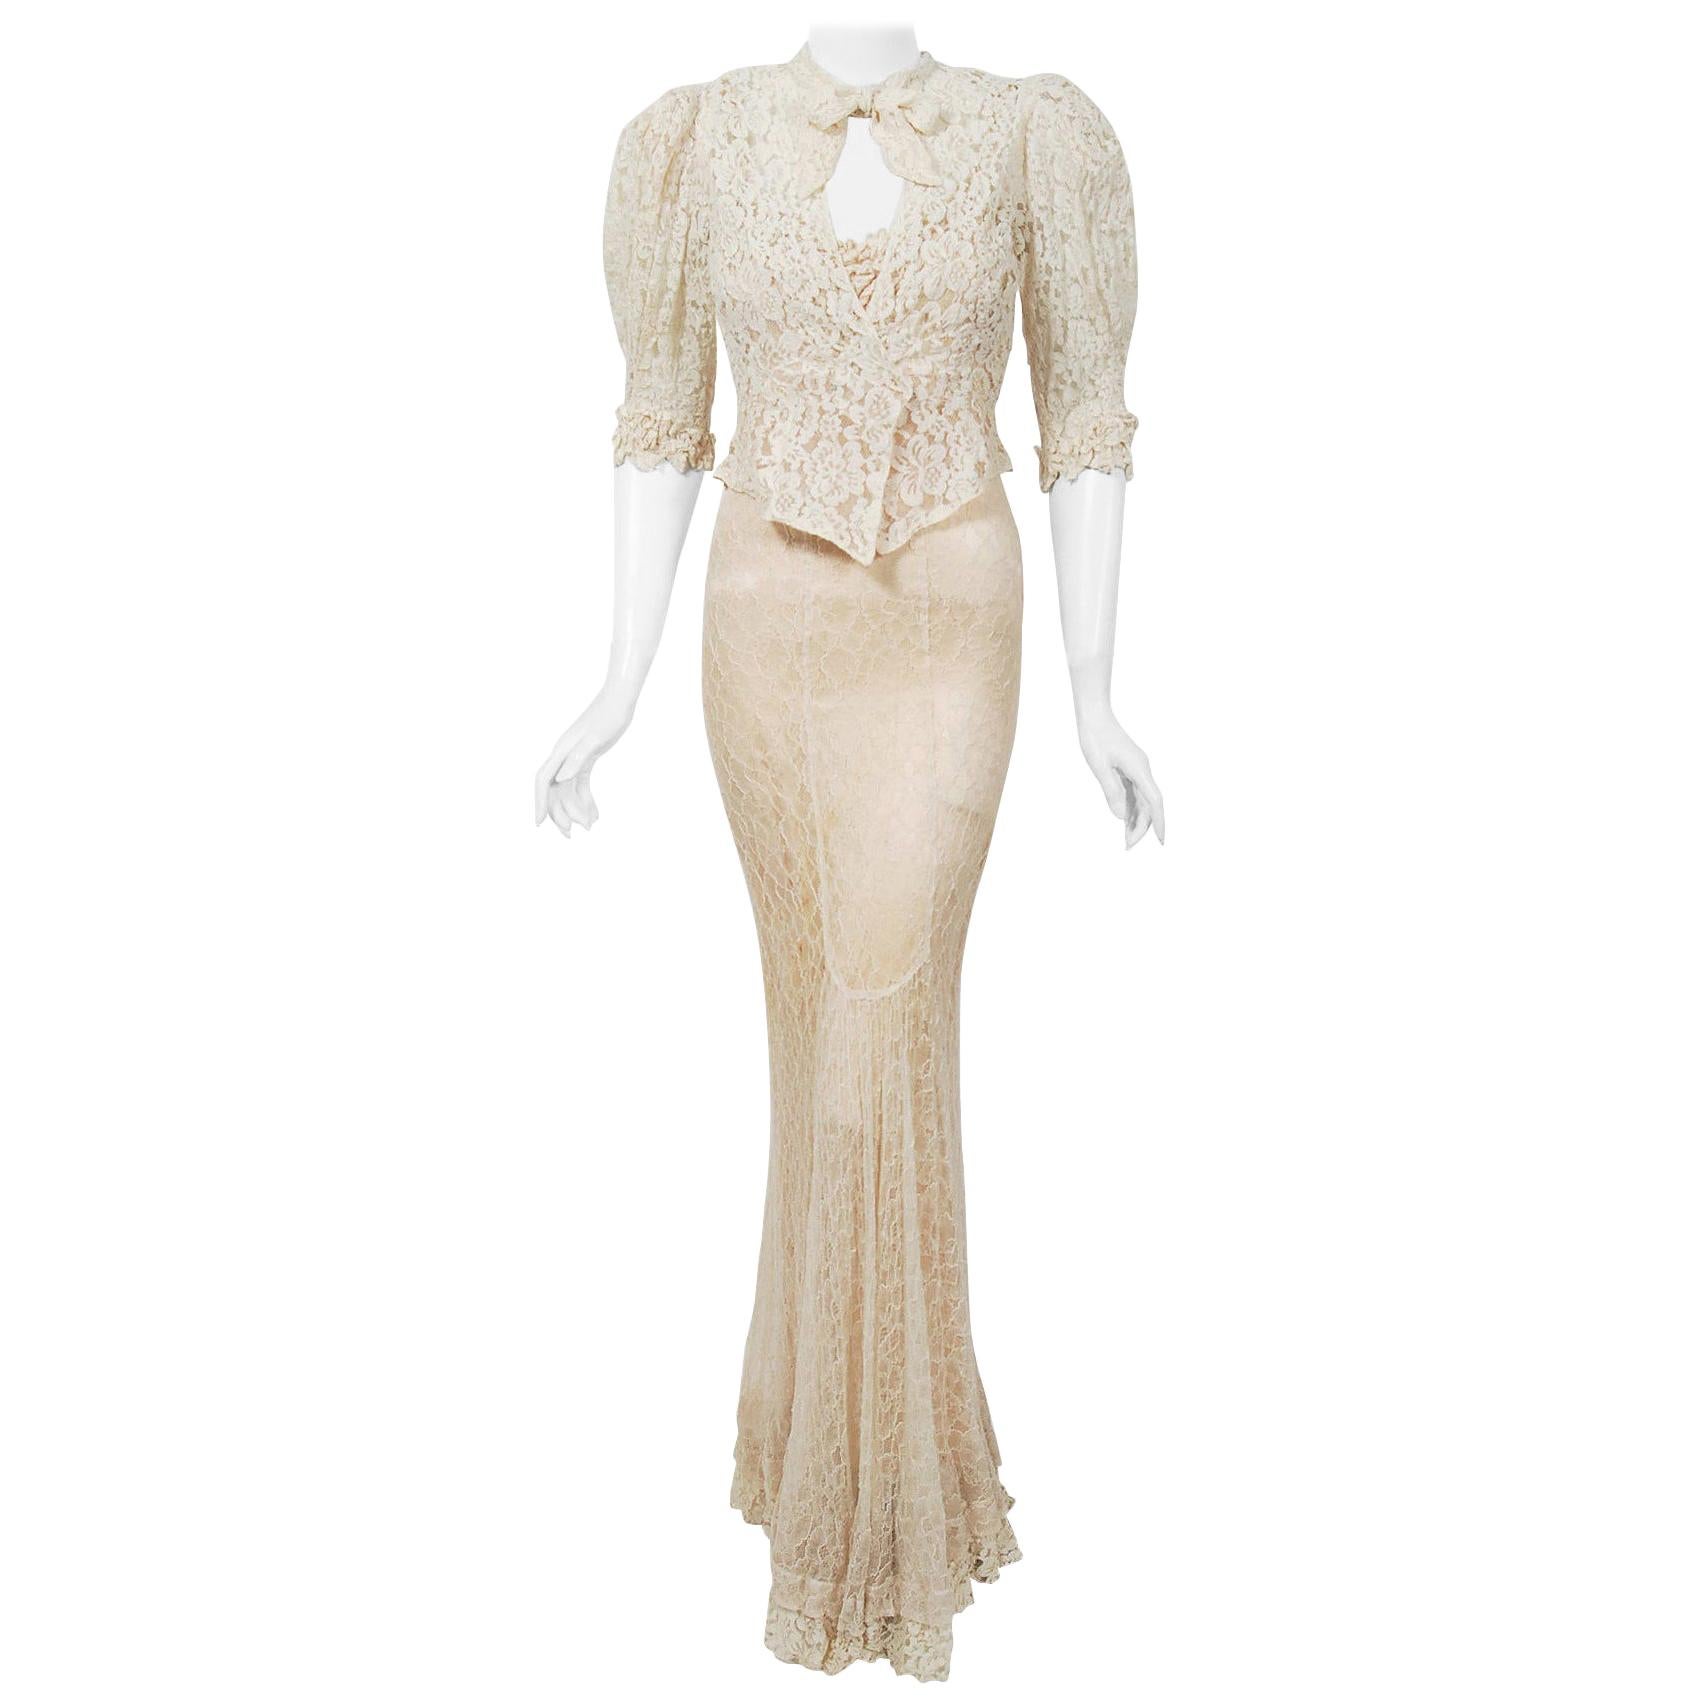 Vintage 1930's Couture Ivory Lace Nude Illusion Backless Bias-Cut Gown & Jacket